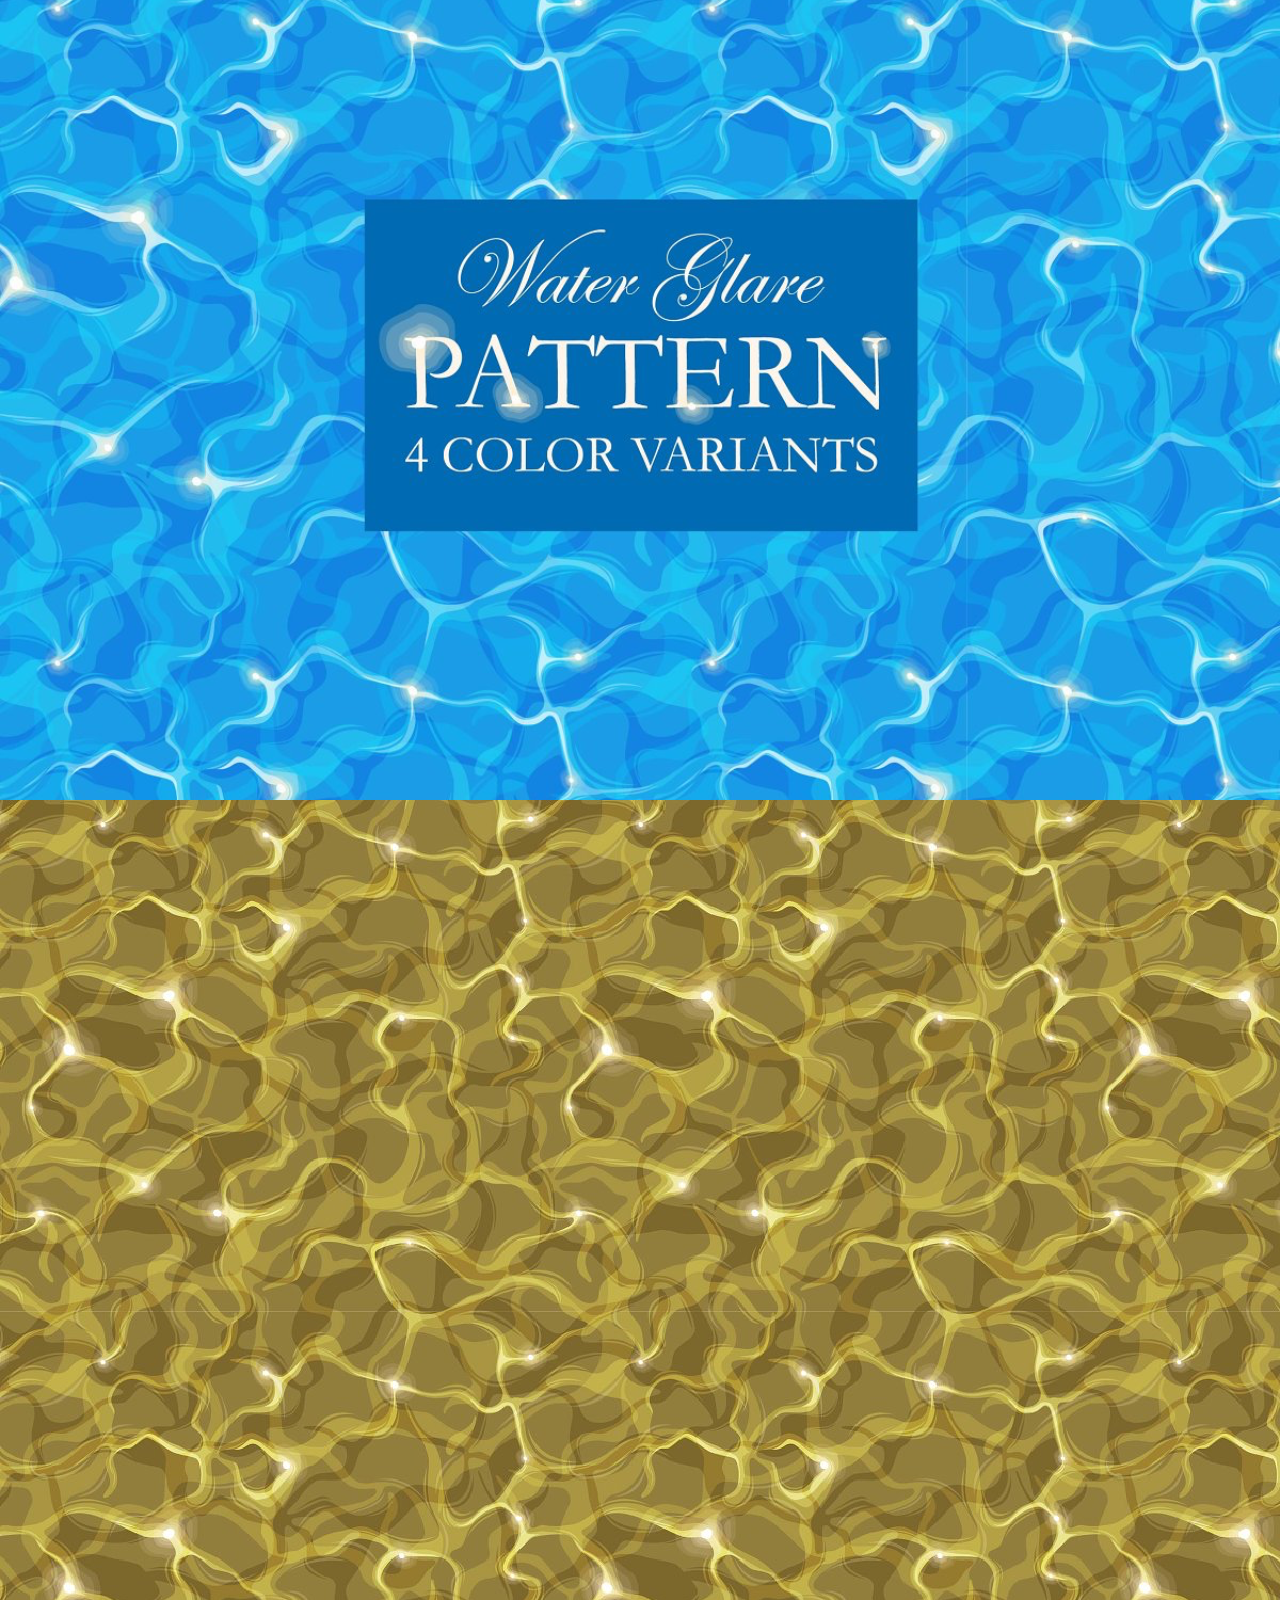 Water glare pattern pinterest image preview.